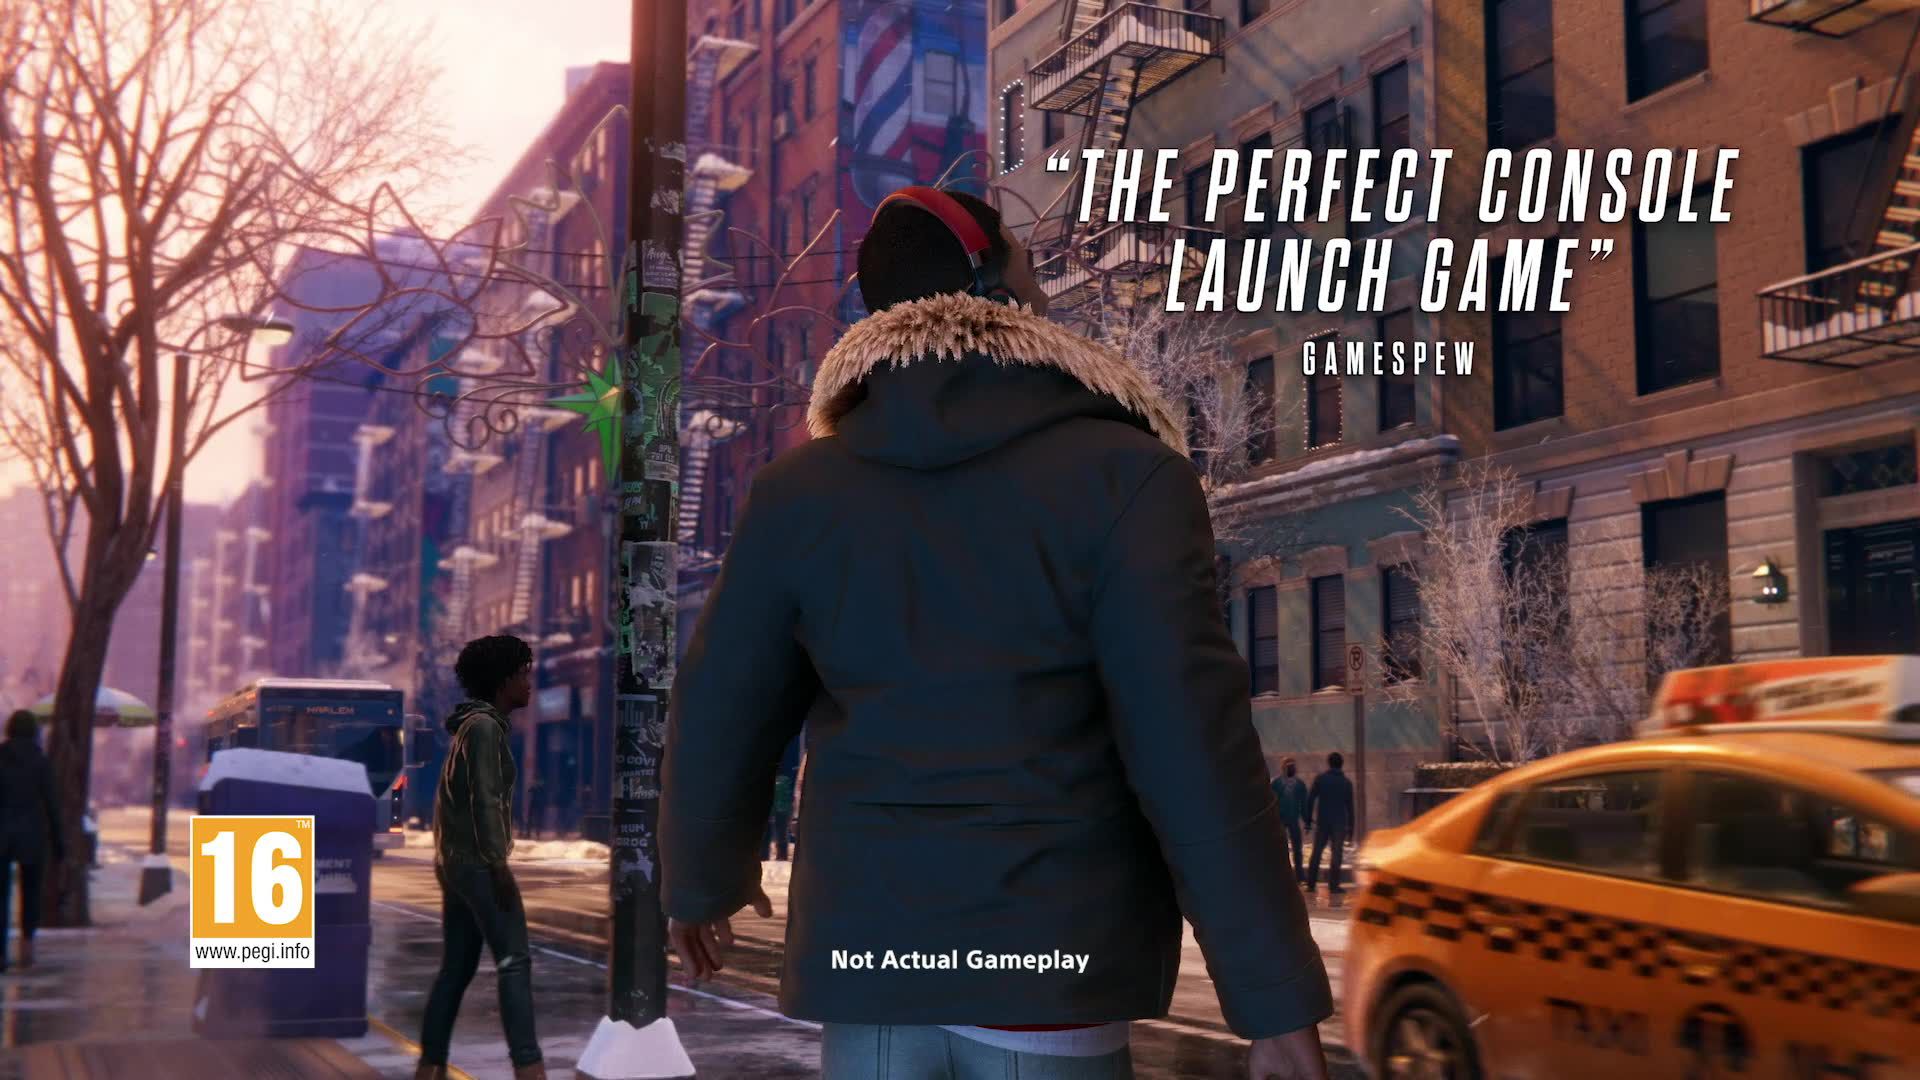 Marvel's Spider-Man: Miles Morales Ultimate Edition, PS5